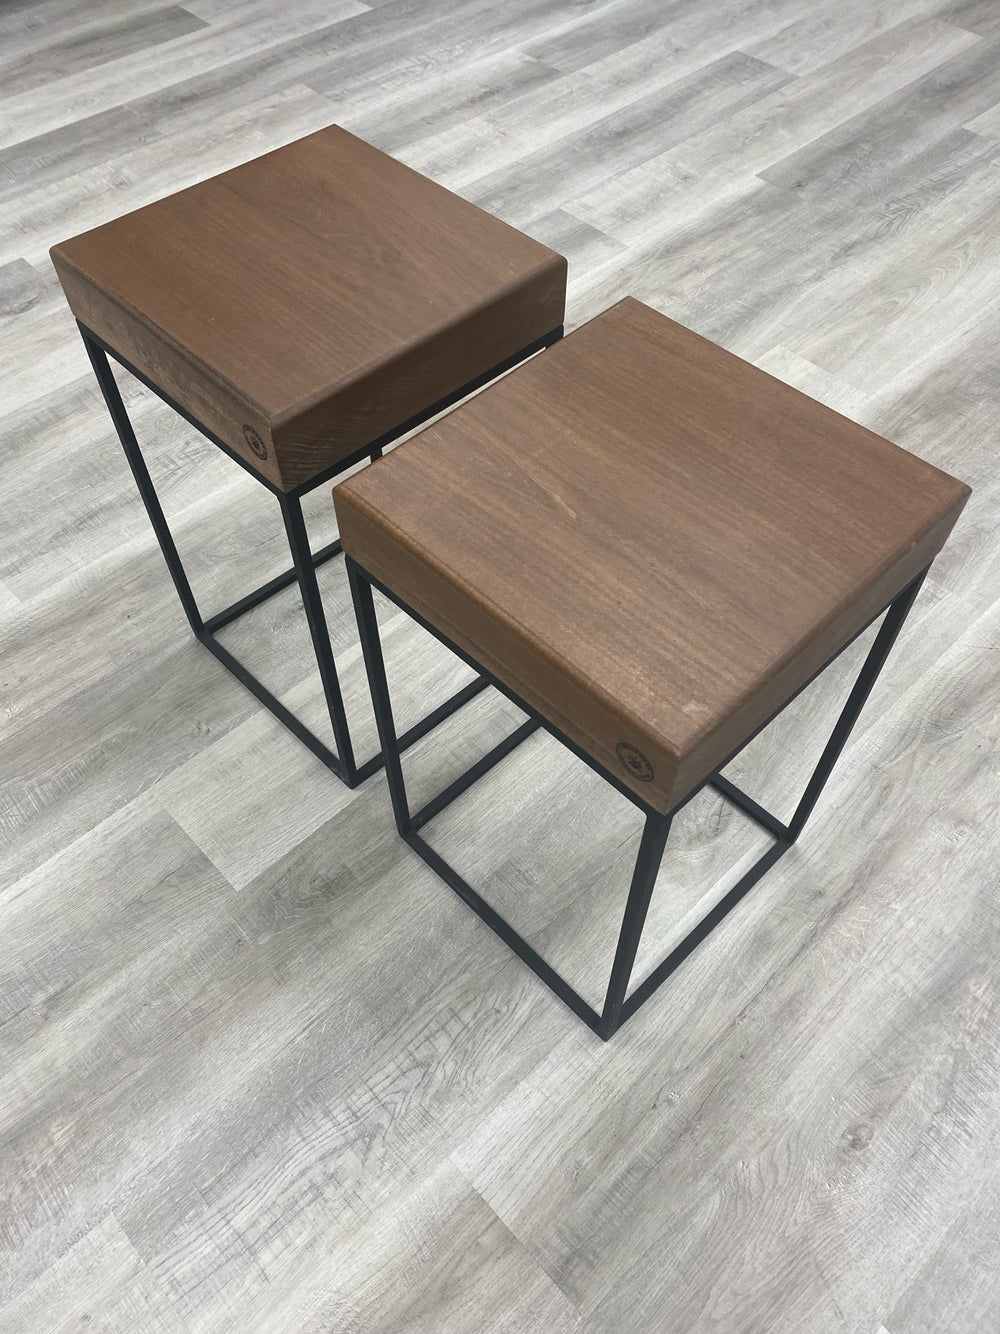 Timberware - solid wood side tables with steel bases